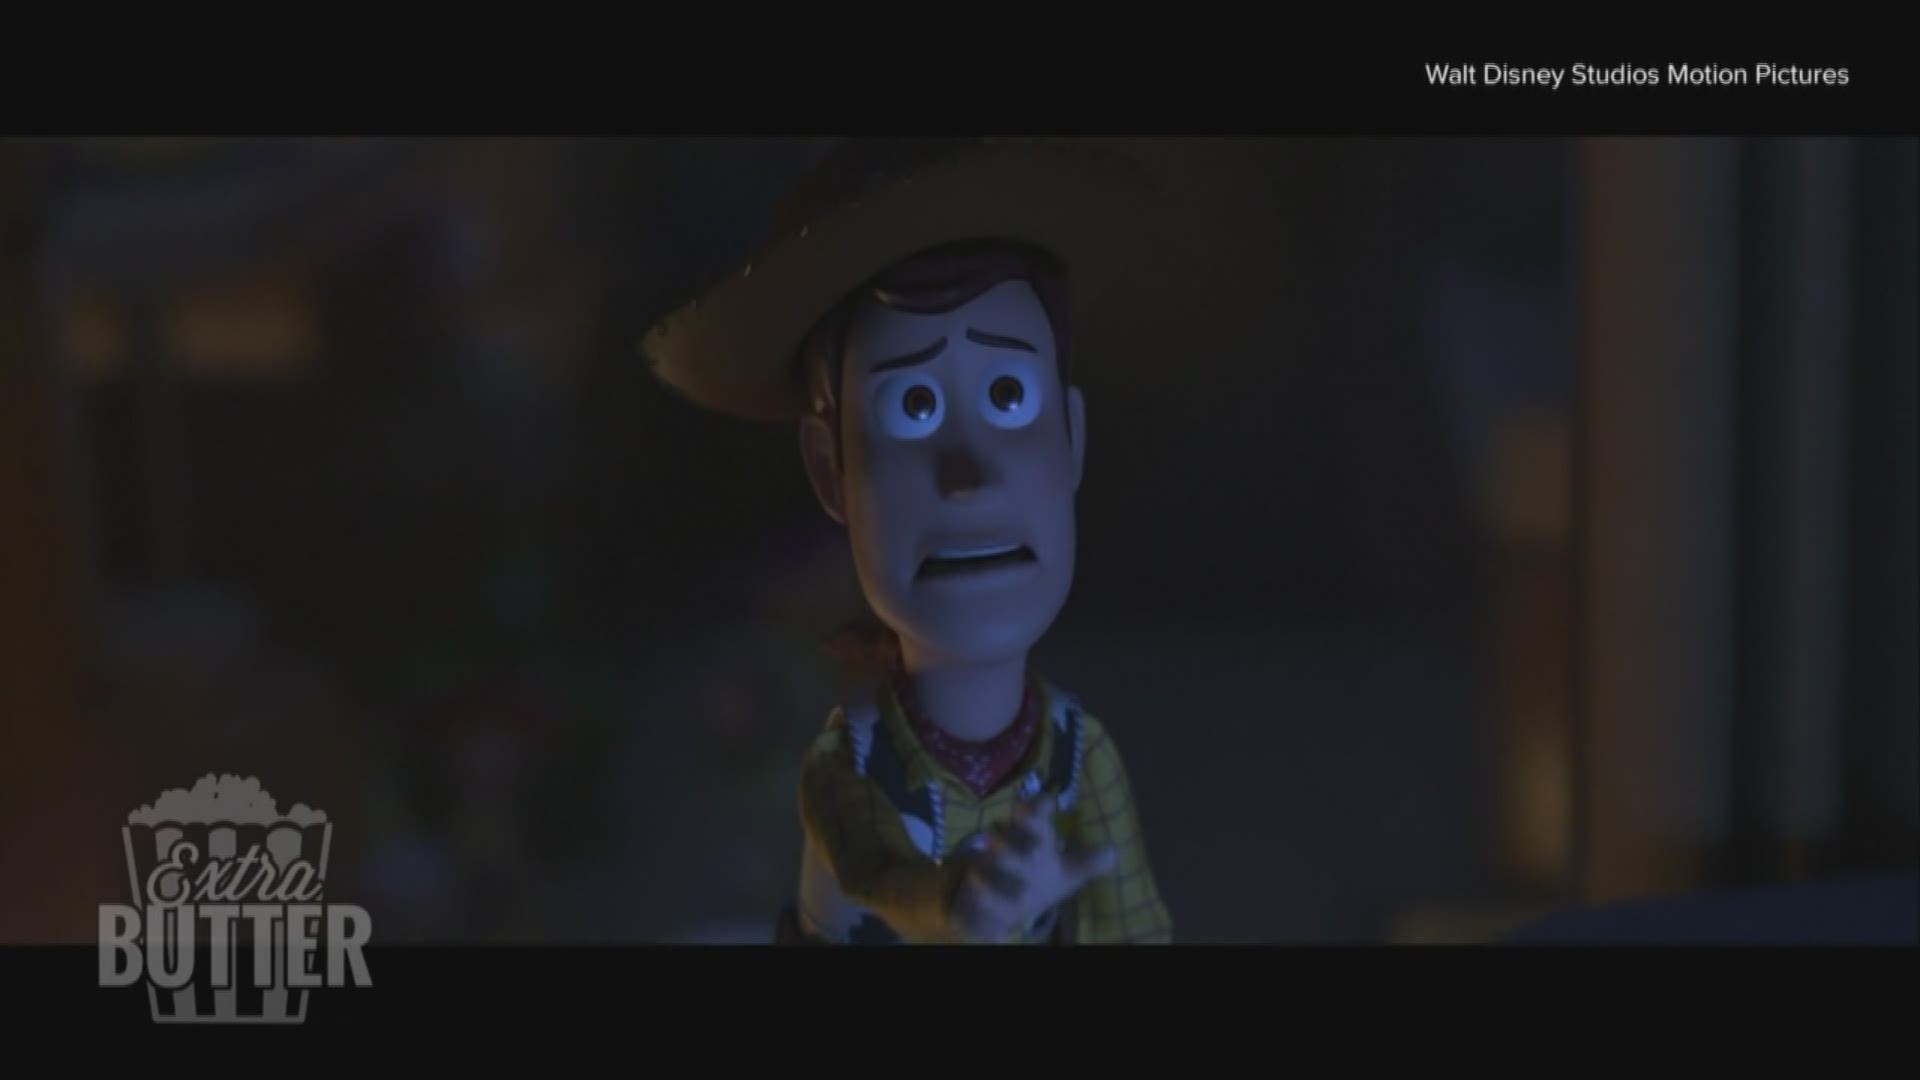 Tom Hanks and Tim Allen talk about the new chapter in the 'Toy Story' franchise and what to expect in 'Toy Story 4.' Also, Keegan-Michael Key talks about the new characters Ducky and Bunny.